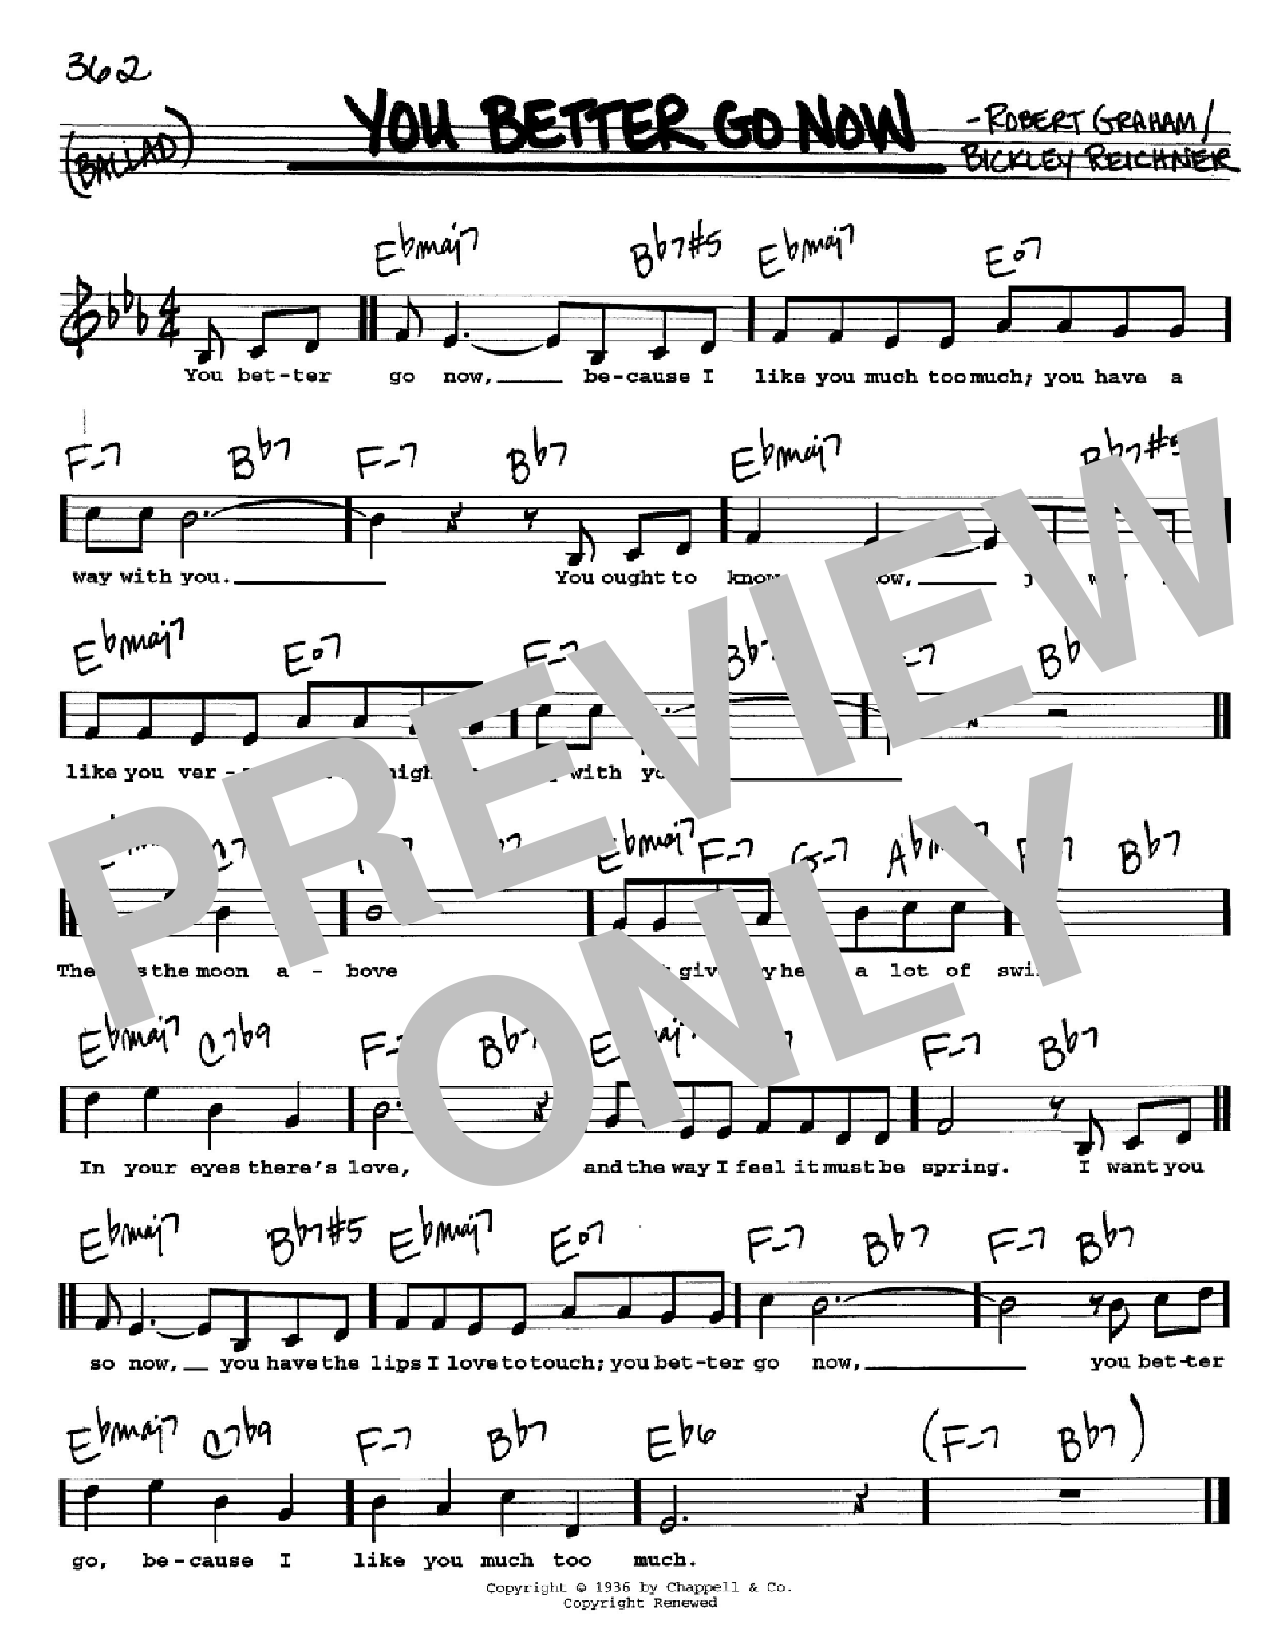 Download Bickley Reichner You Better Go Now Sheet Music